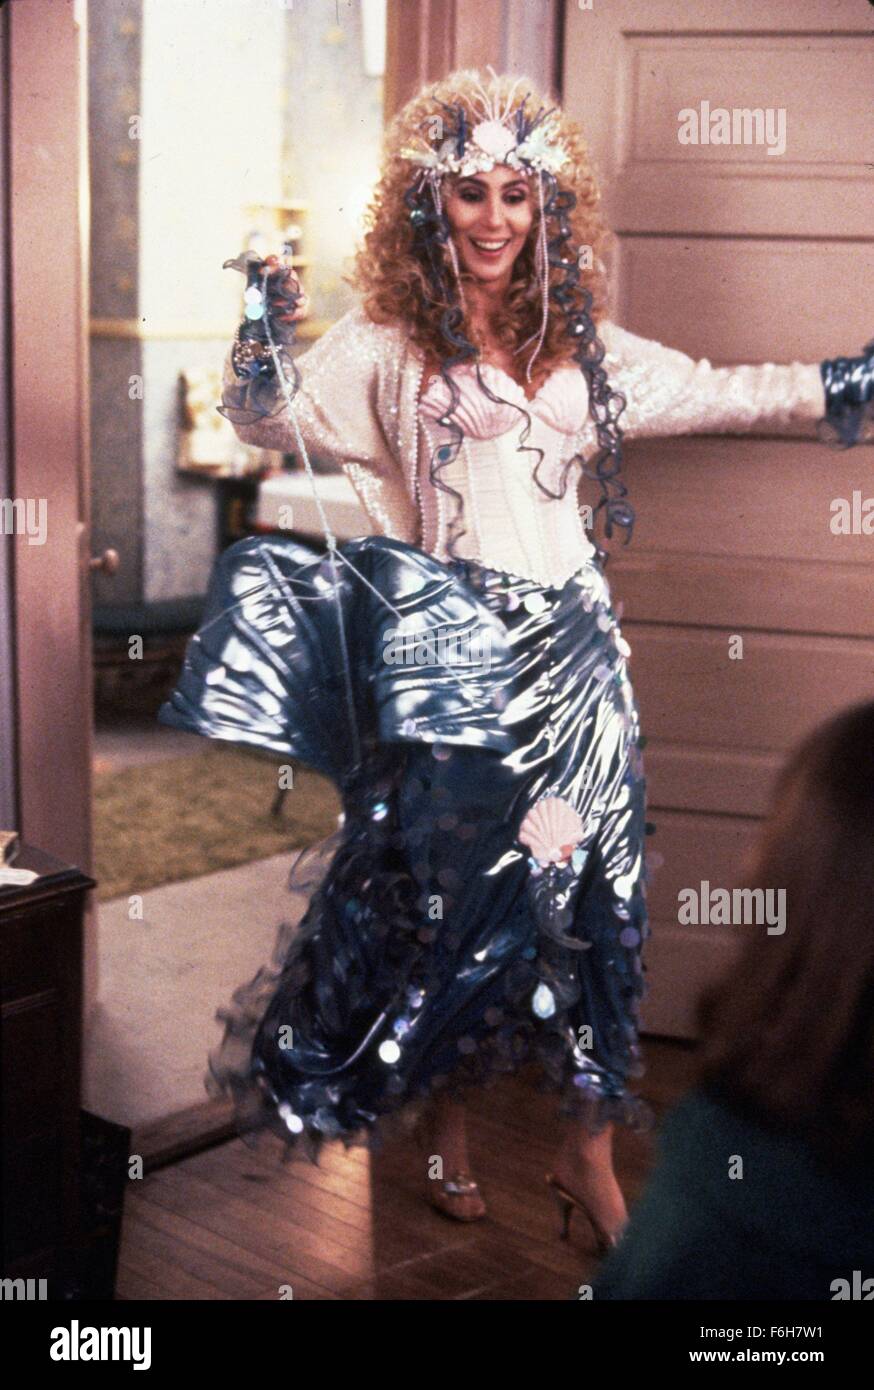 RELEASE DATE: December 14, 1990   MOVIE TITLE: Mermaids   STUDIO: Orion Pictures  DIRECTOR: Richard Benjamin   PLOT: An unconventional single mother relocates with her two daughters to a small Massachusetts town in 1963, where a number of events and relationships both challenge and strengthen their familial bonds.  PICTURED: CHER as Mrs. Flax.   (Credit Image: c Orion Pictures/Entertainment Pictures) Stock Photo